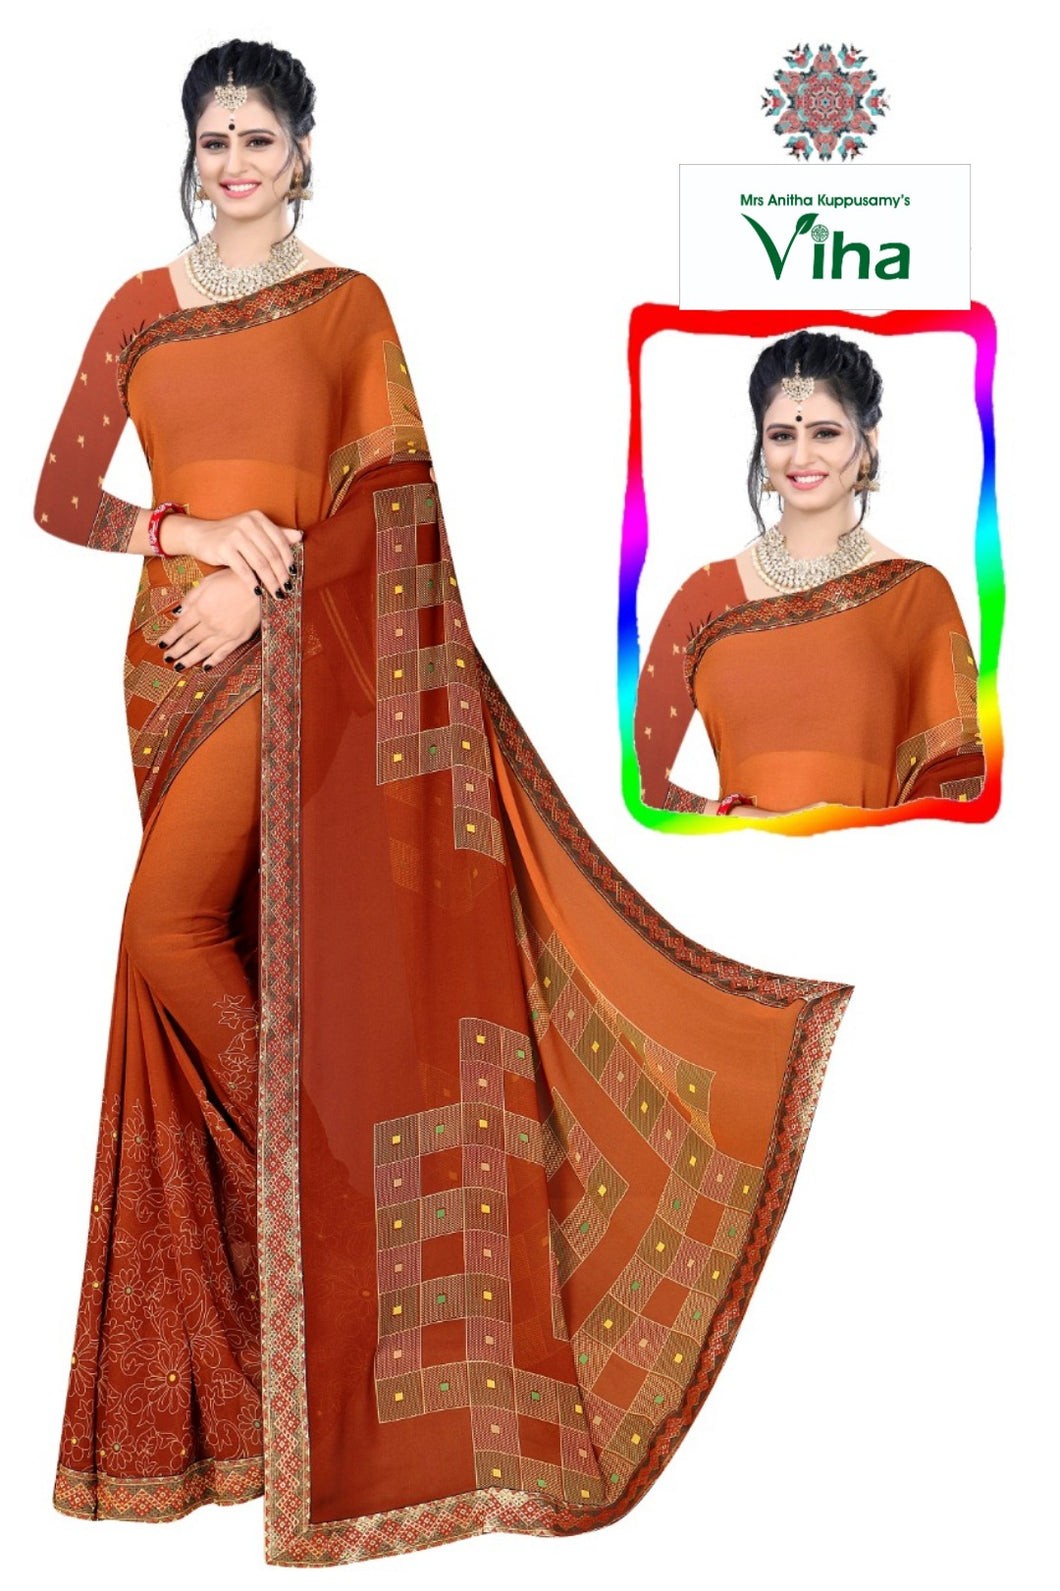 Soft Georgette Saree with Border & with Blouse